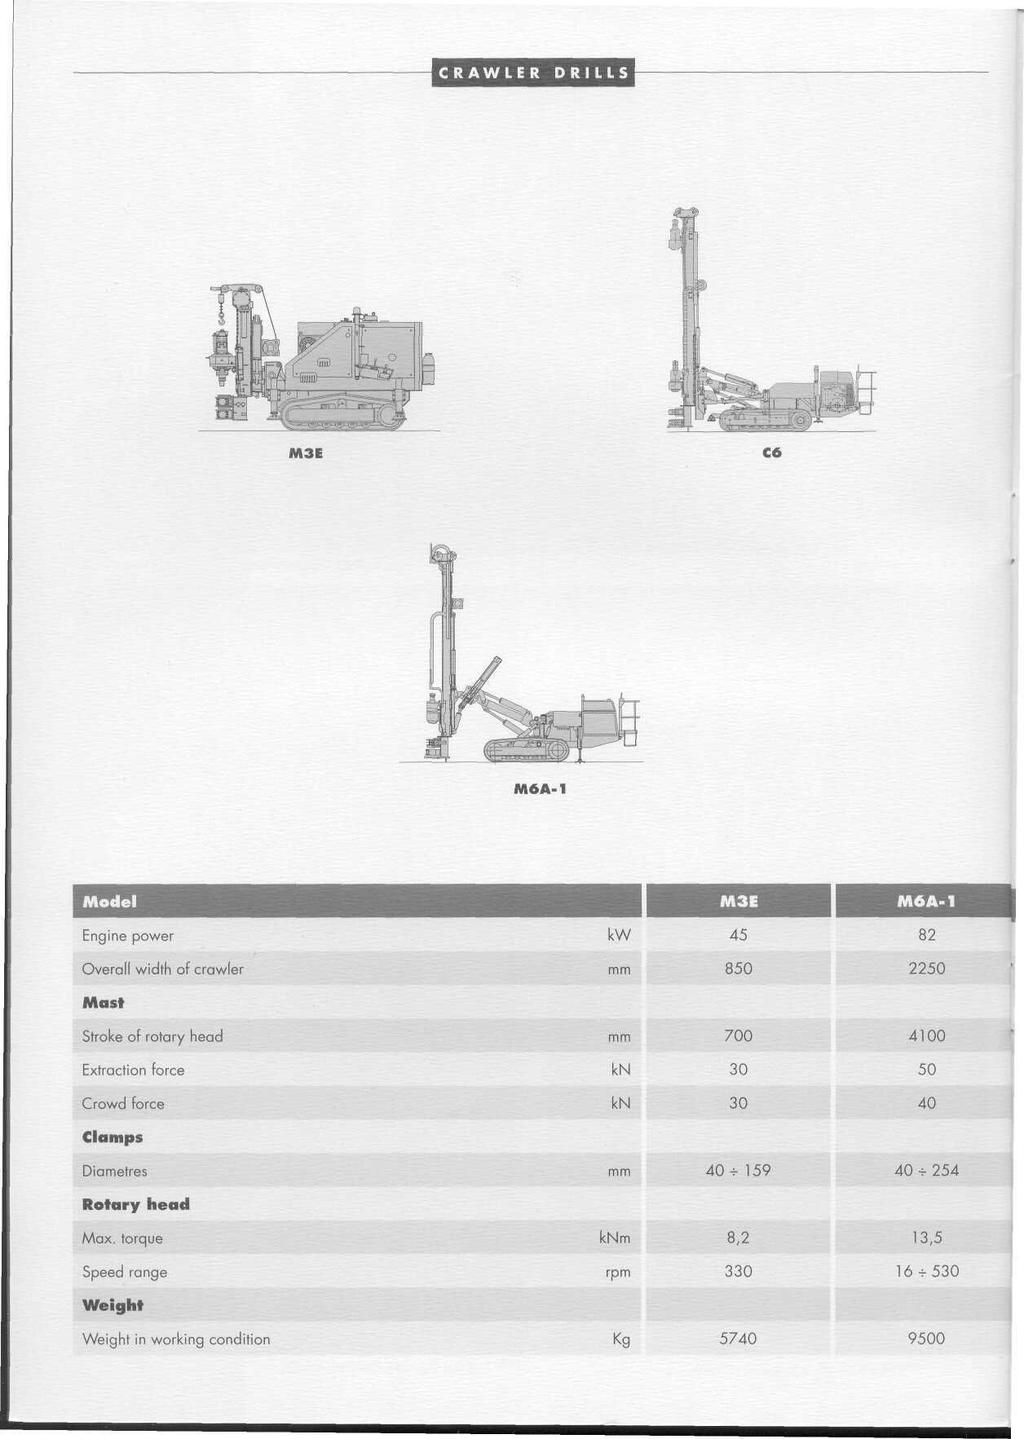 CRAWLER DRILLS IA3E C6 M6A-1 Model Engine power kw кан 45 M6A-1 82 i Overall width of crawler 850 2250 Mast Stroke of rotary head 700 4100 Extraction force kn 30 50